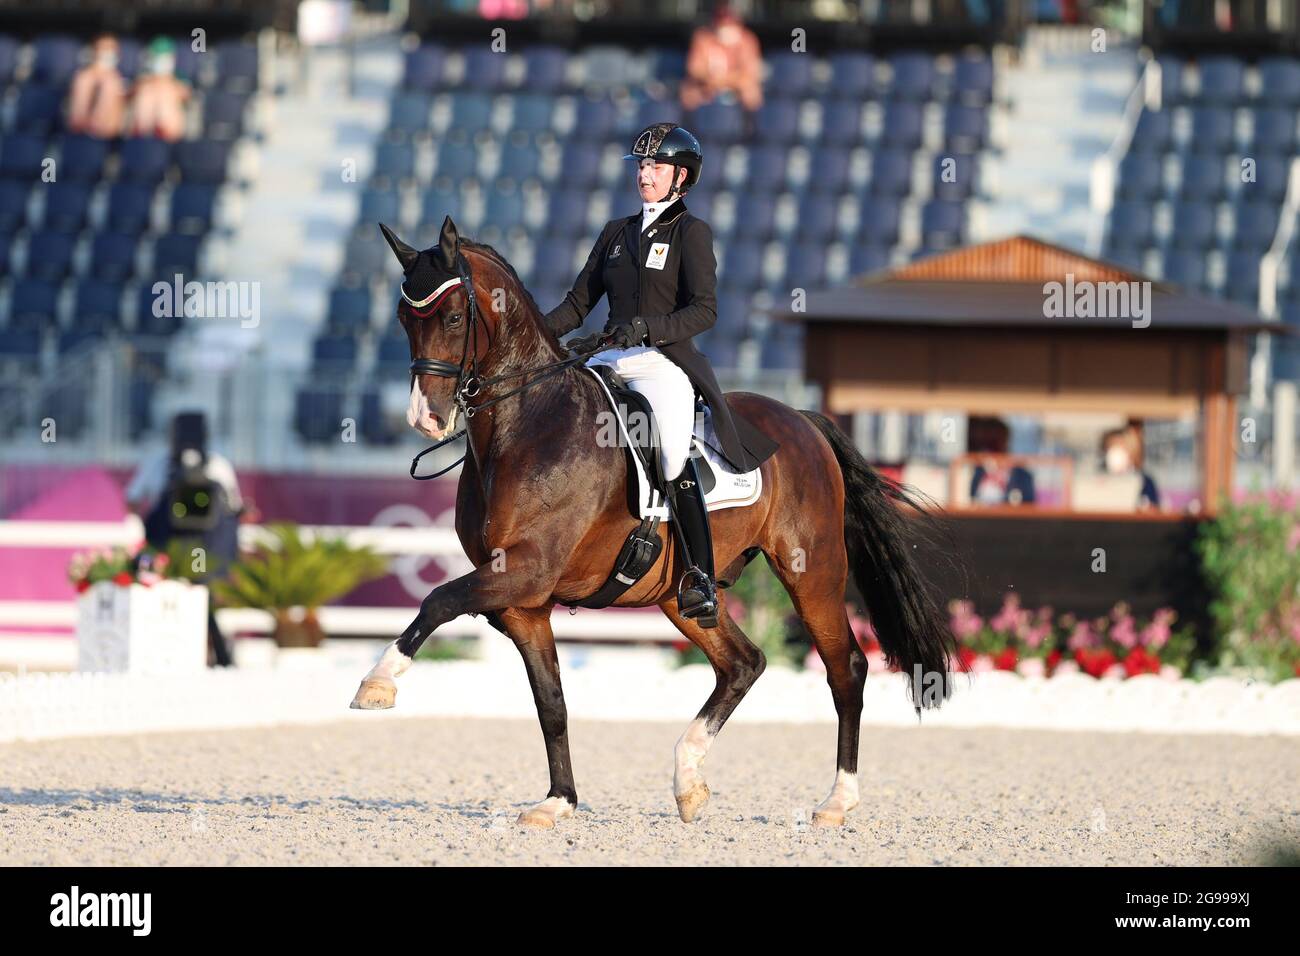 Belgian Equestrian dressage rider Laurence Roos and her horse Fil Rouge pictured in action during day two of the equestrian dressage event, at the 'To Stock Photo